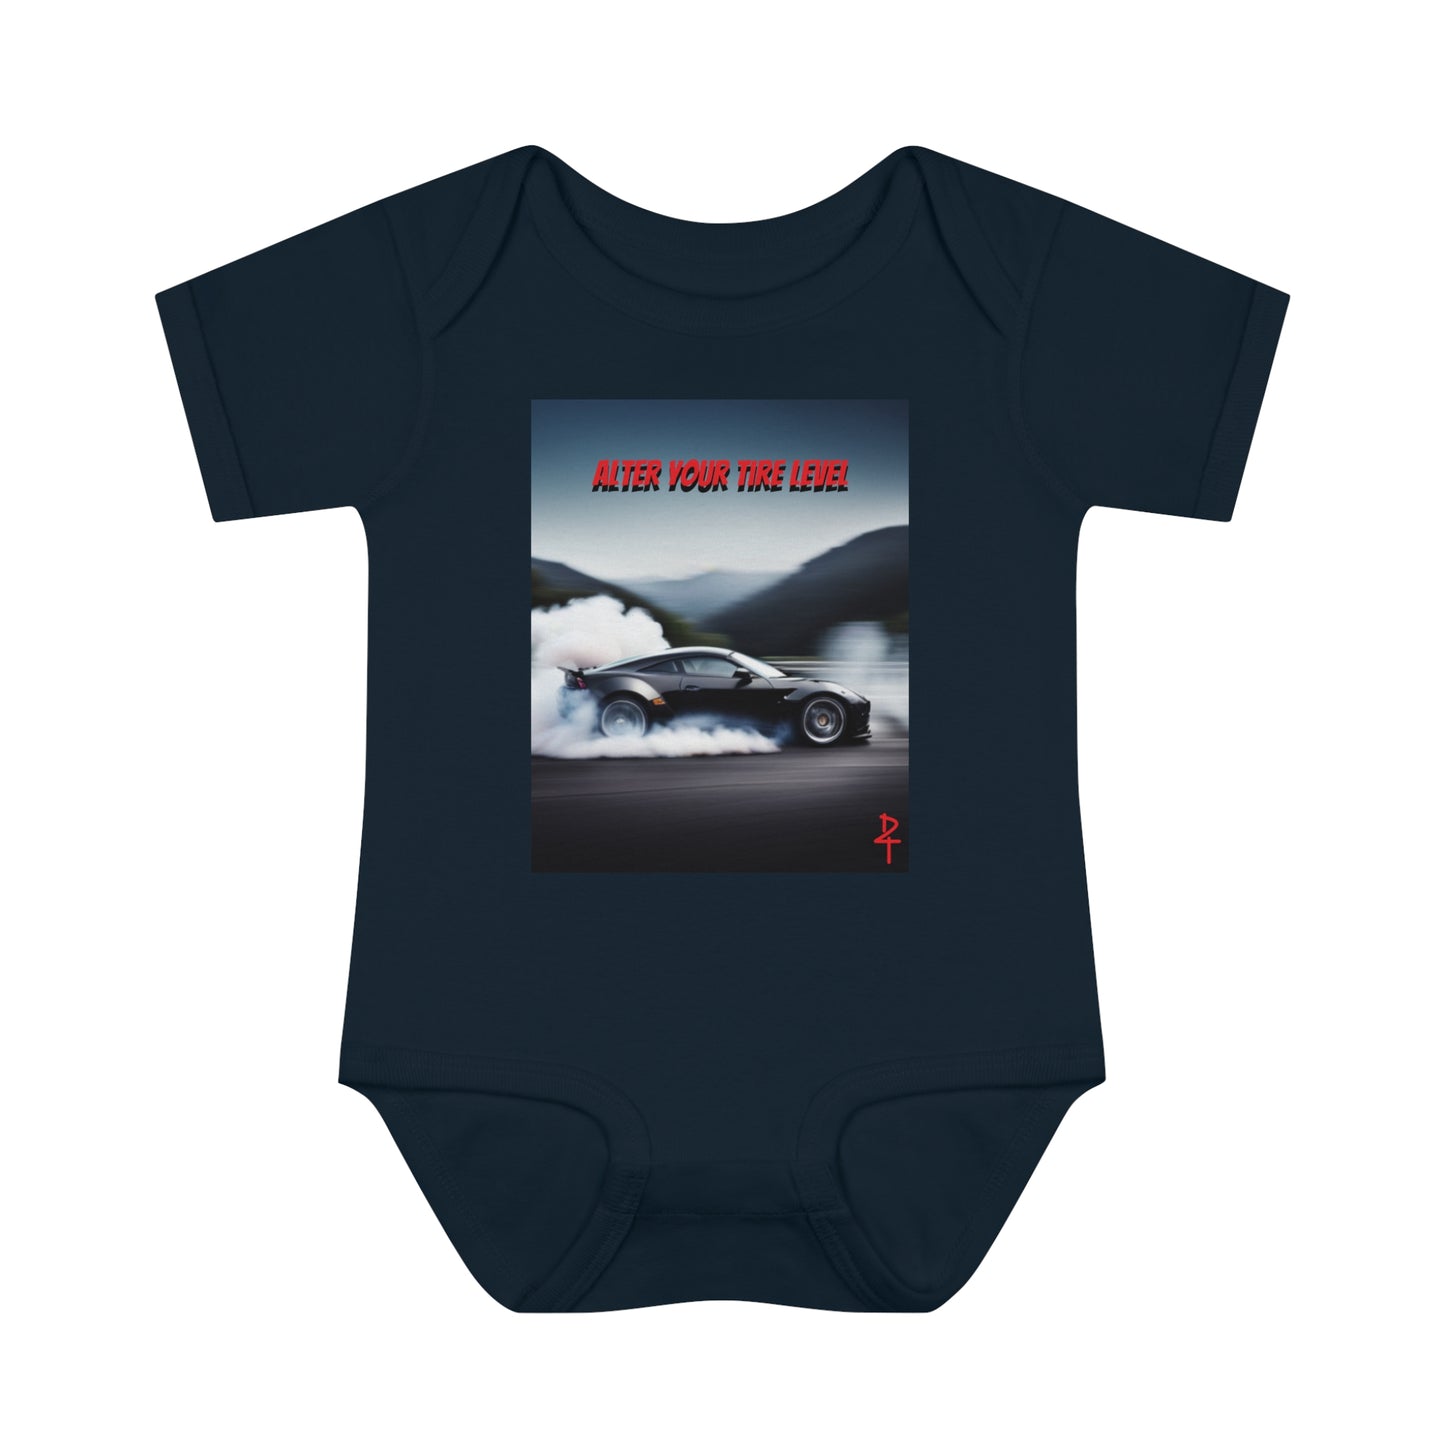 ALTER YOUR TIRE LEVEL INFANT BODY SUIT